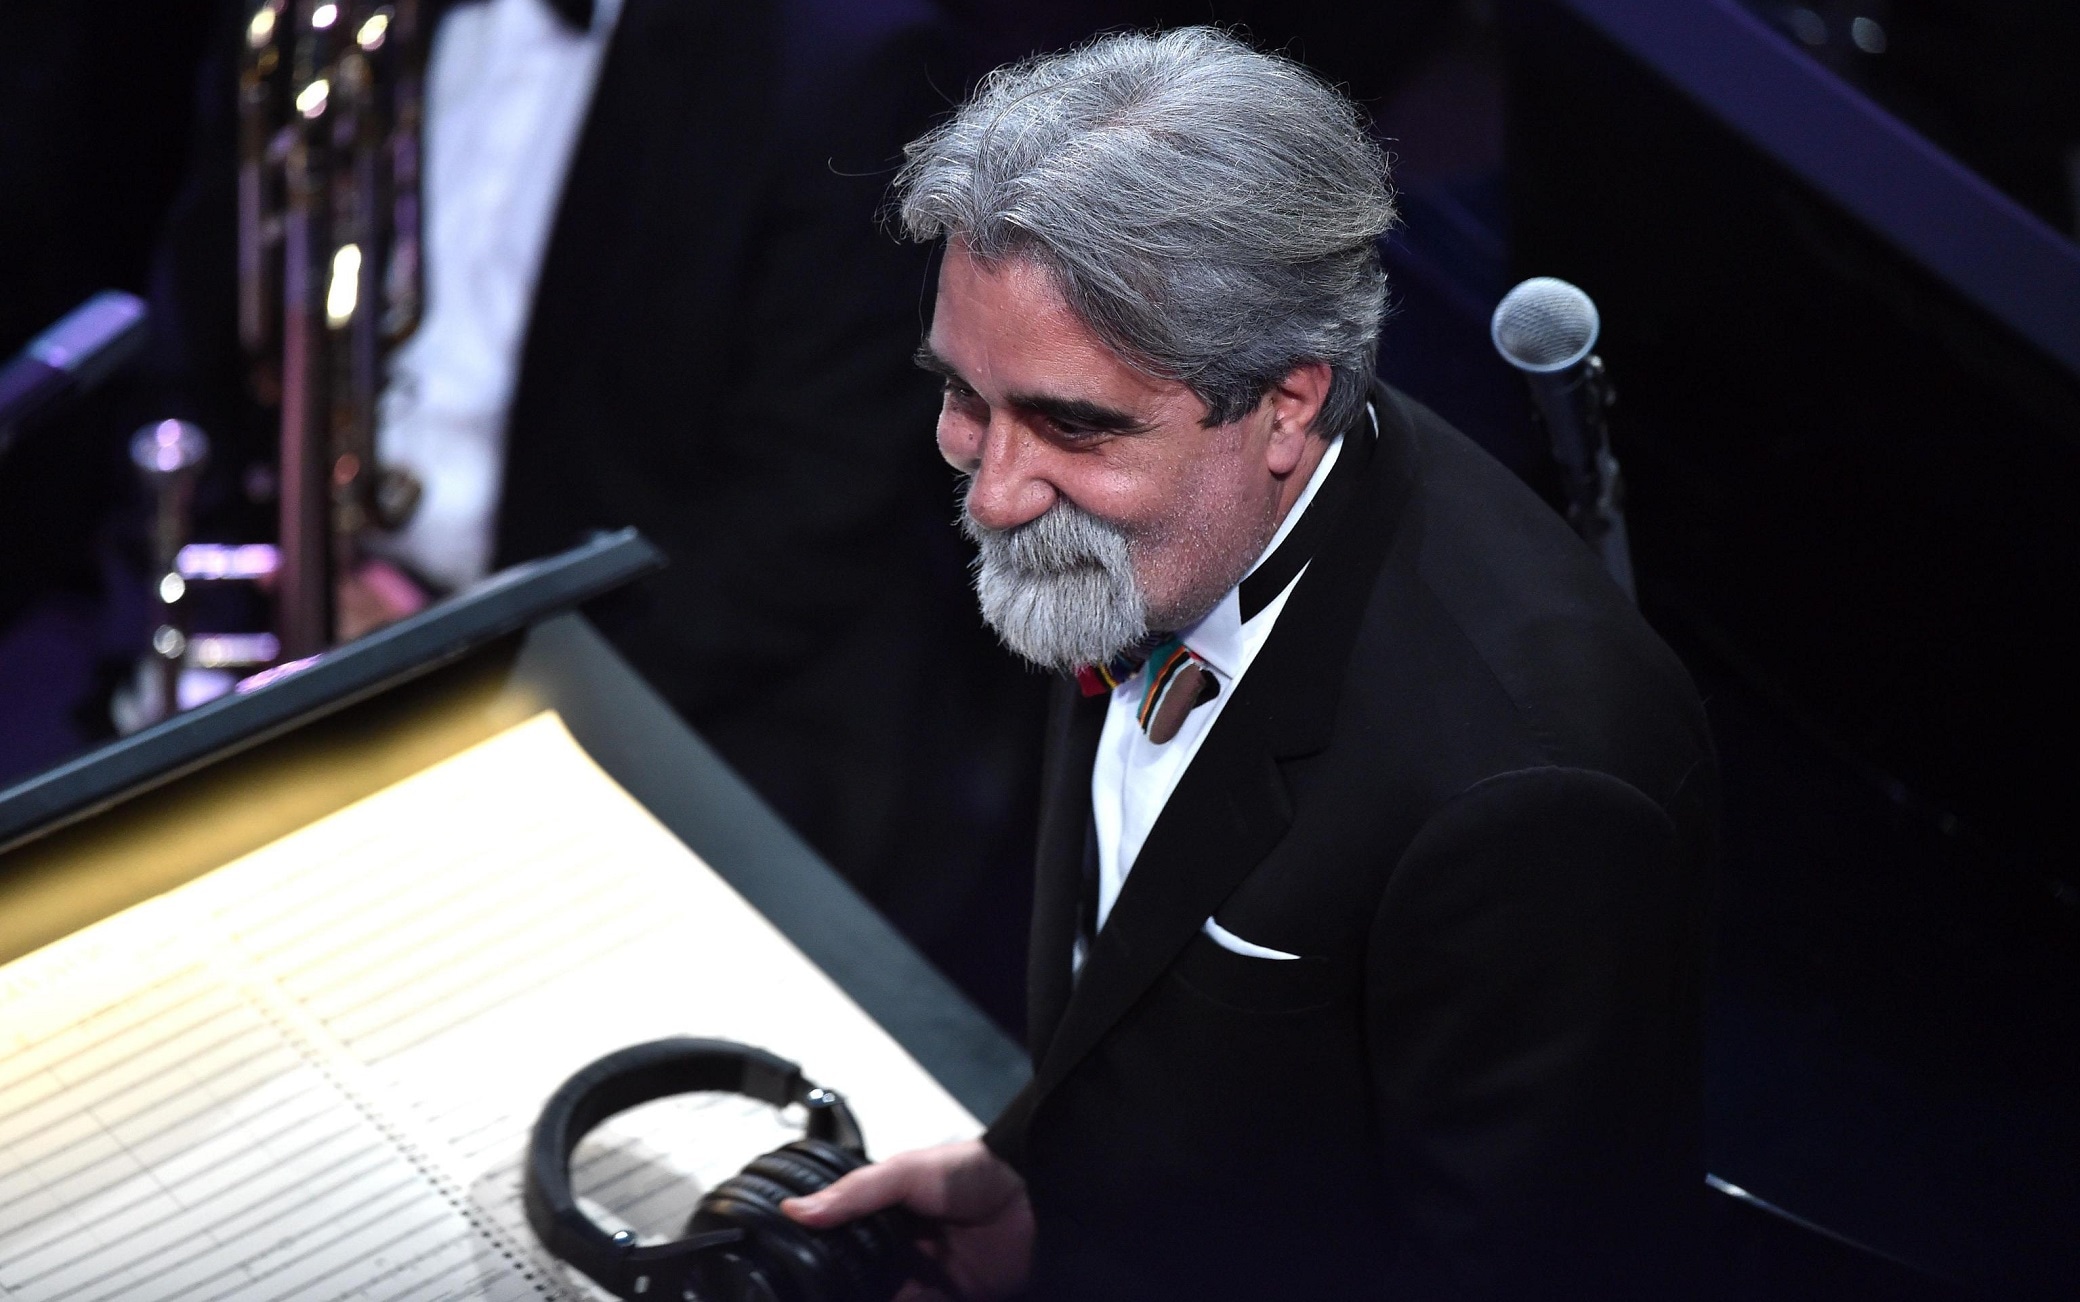 Italian musician Beppe Vessicchio performs on stage during the Sanremo Italian Song Festival at the Ariston theater in Sanremo, Italy,  10 February 2016. The music festival will run from 09 to 13 February. ANSA/ETTORE FERRARI







